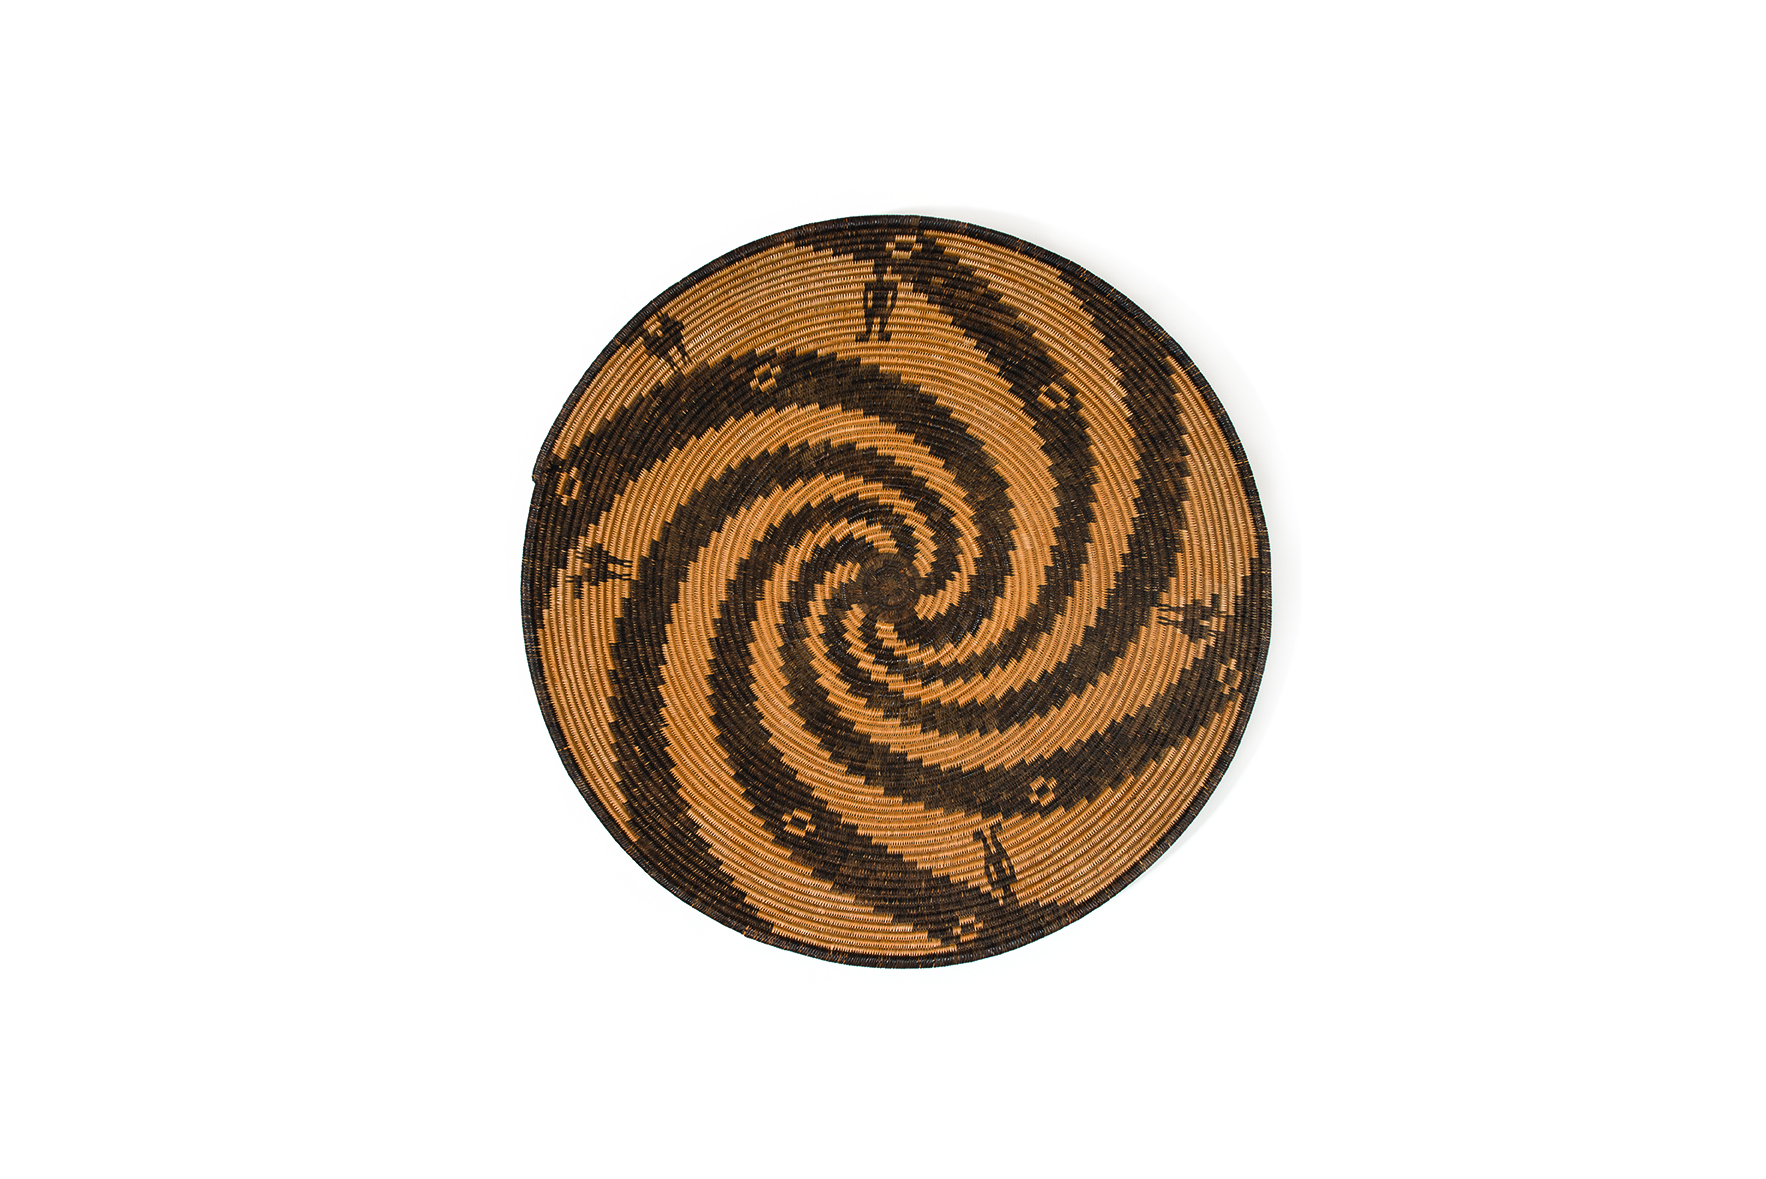 A round woven basket lid with a brown and black spiraling pattern and small black markings.